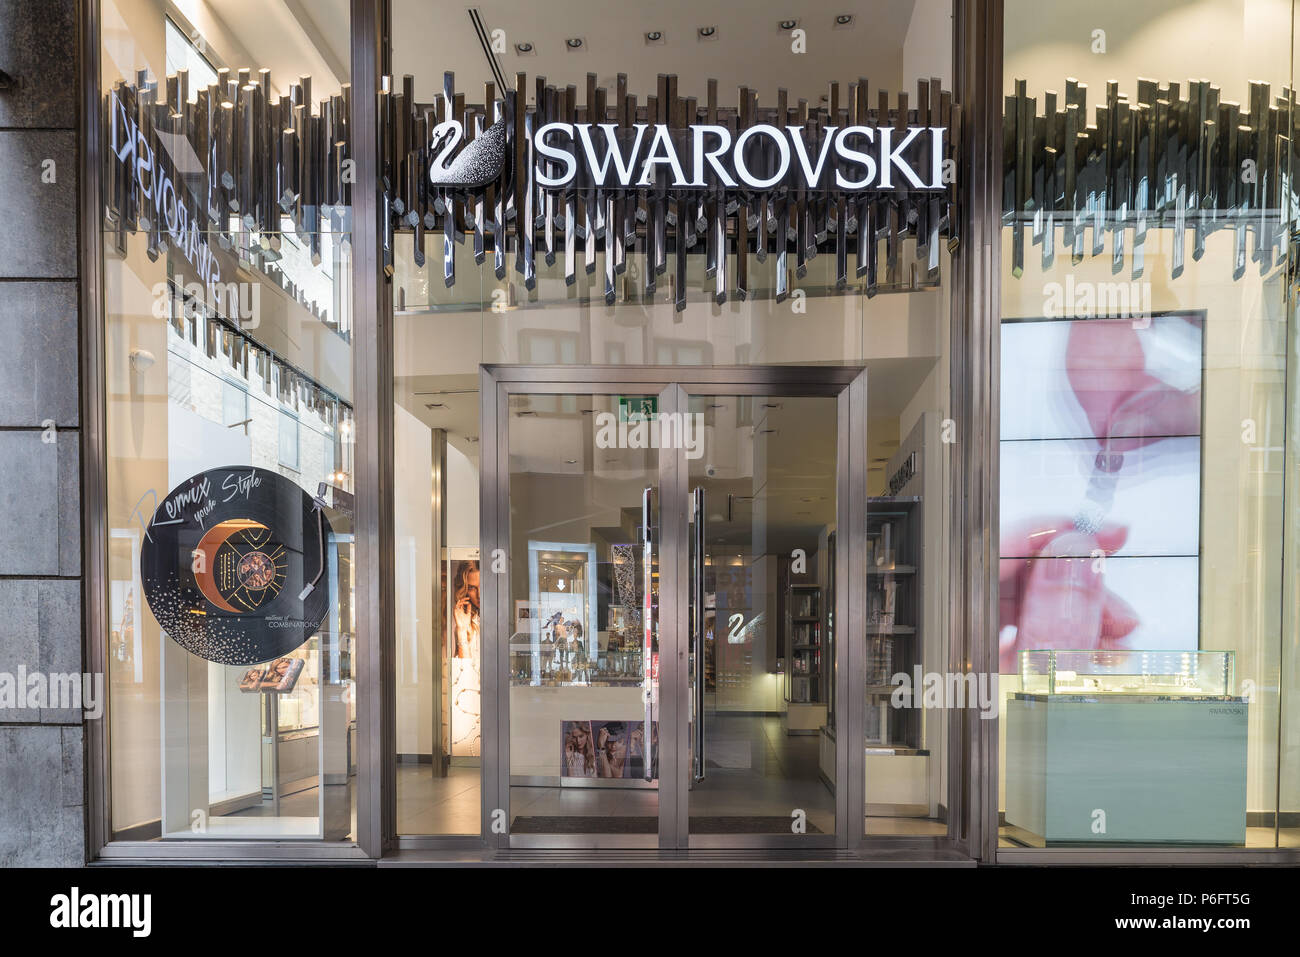 Swarovski Shop High Resolution Stock Photography and Images - Alamy